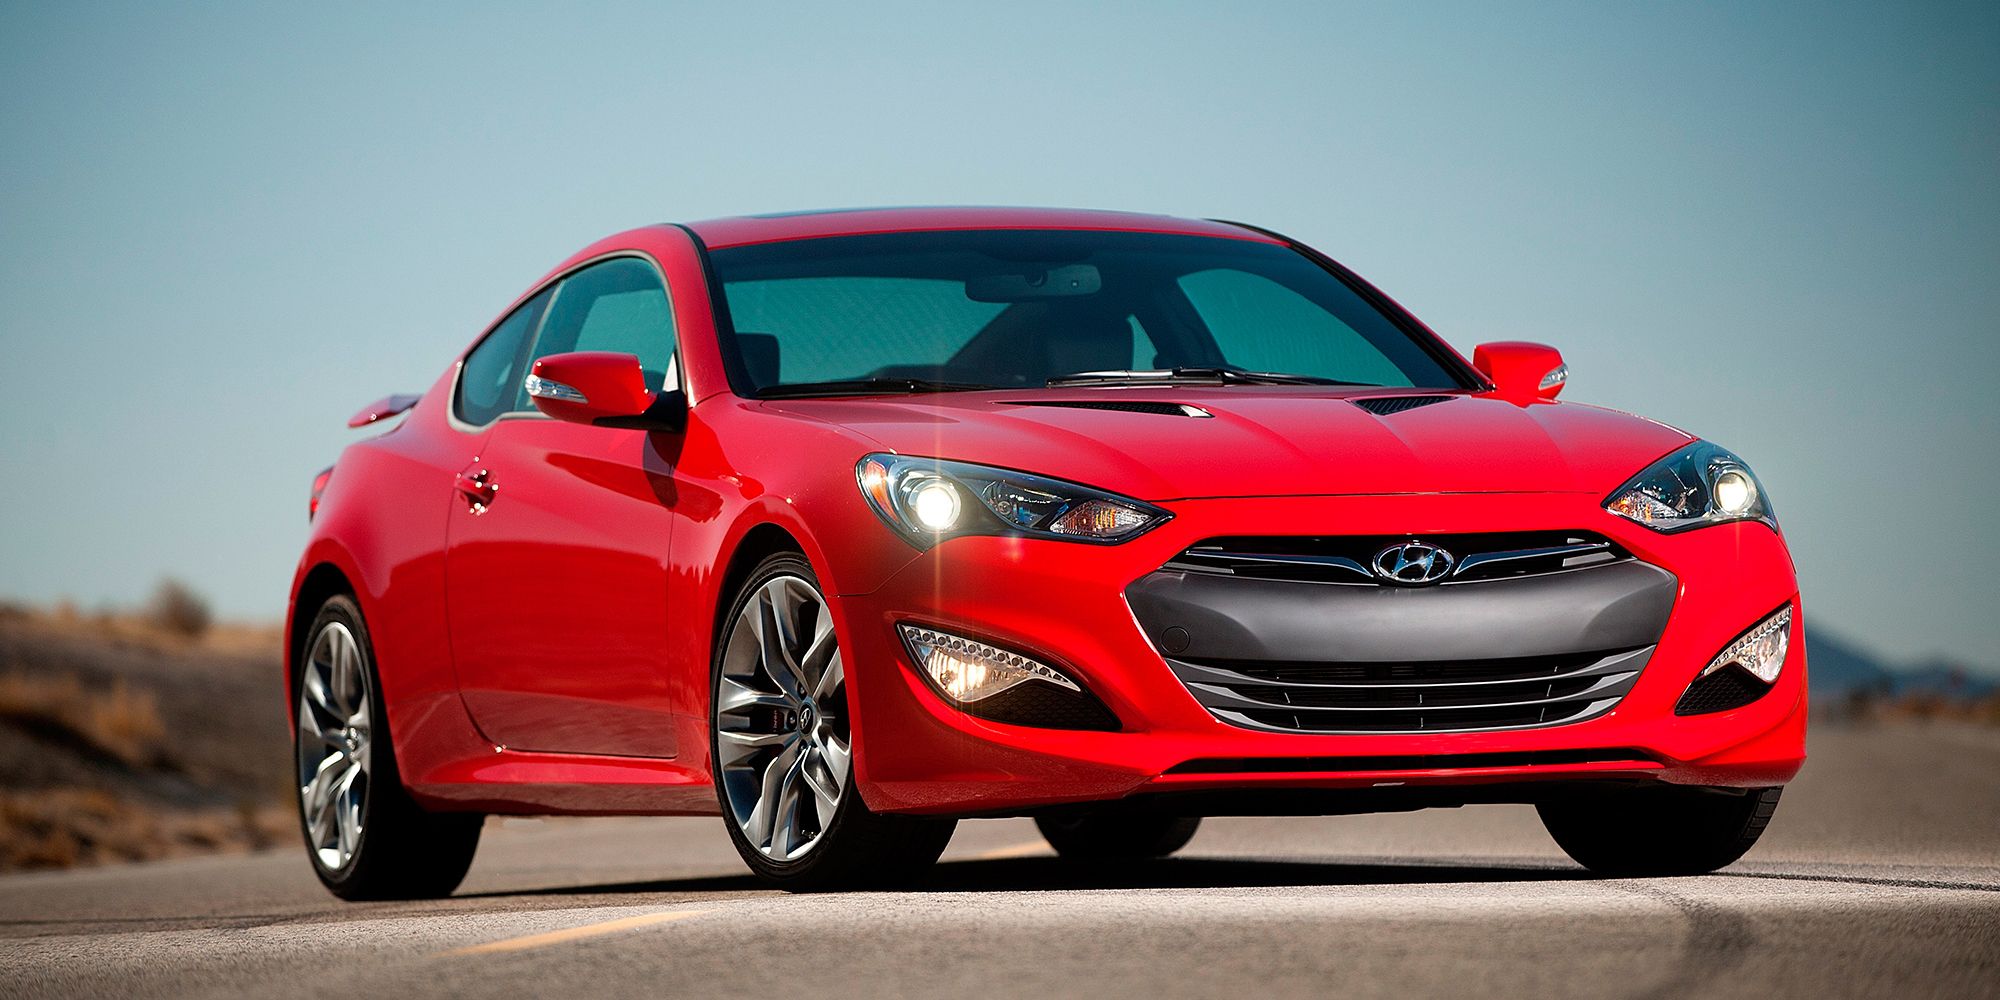 The front of the Genesis Coupe